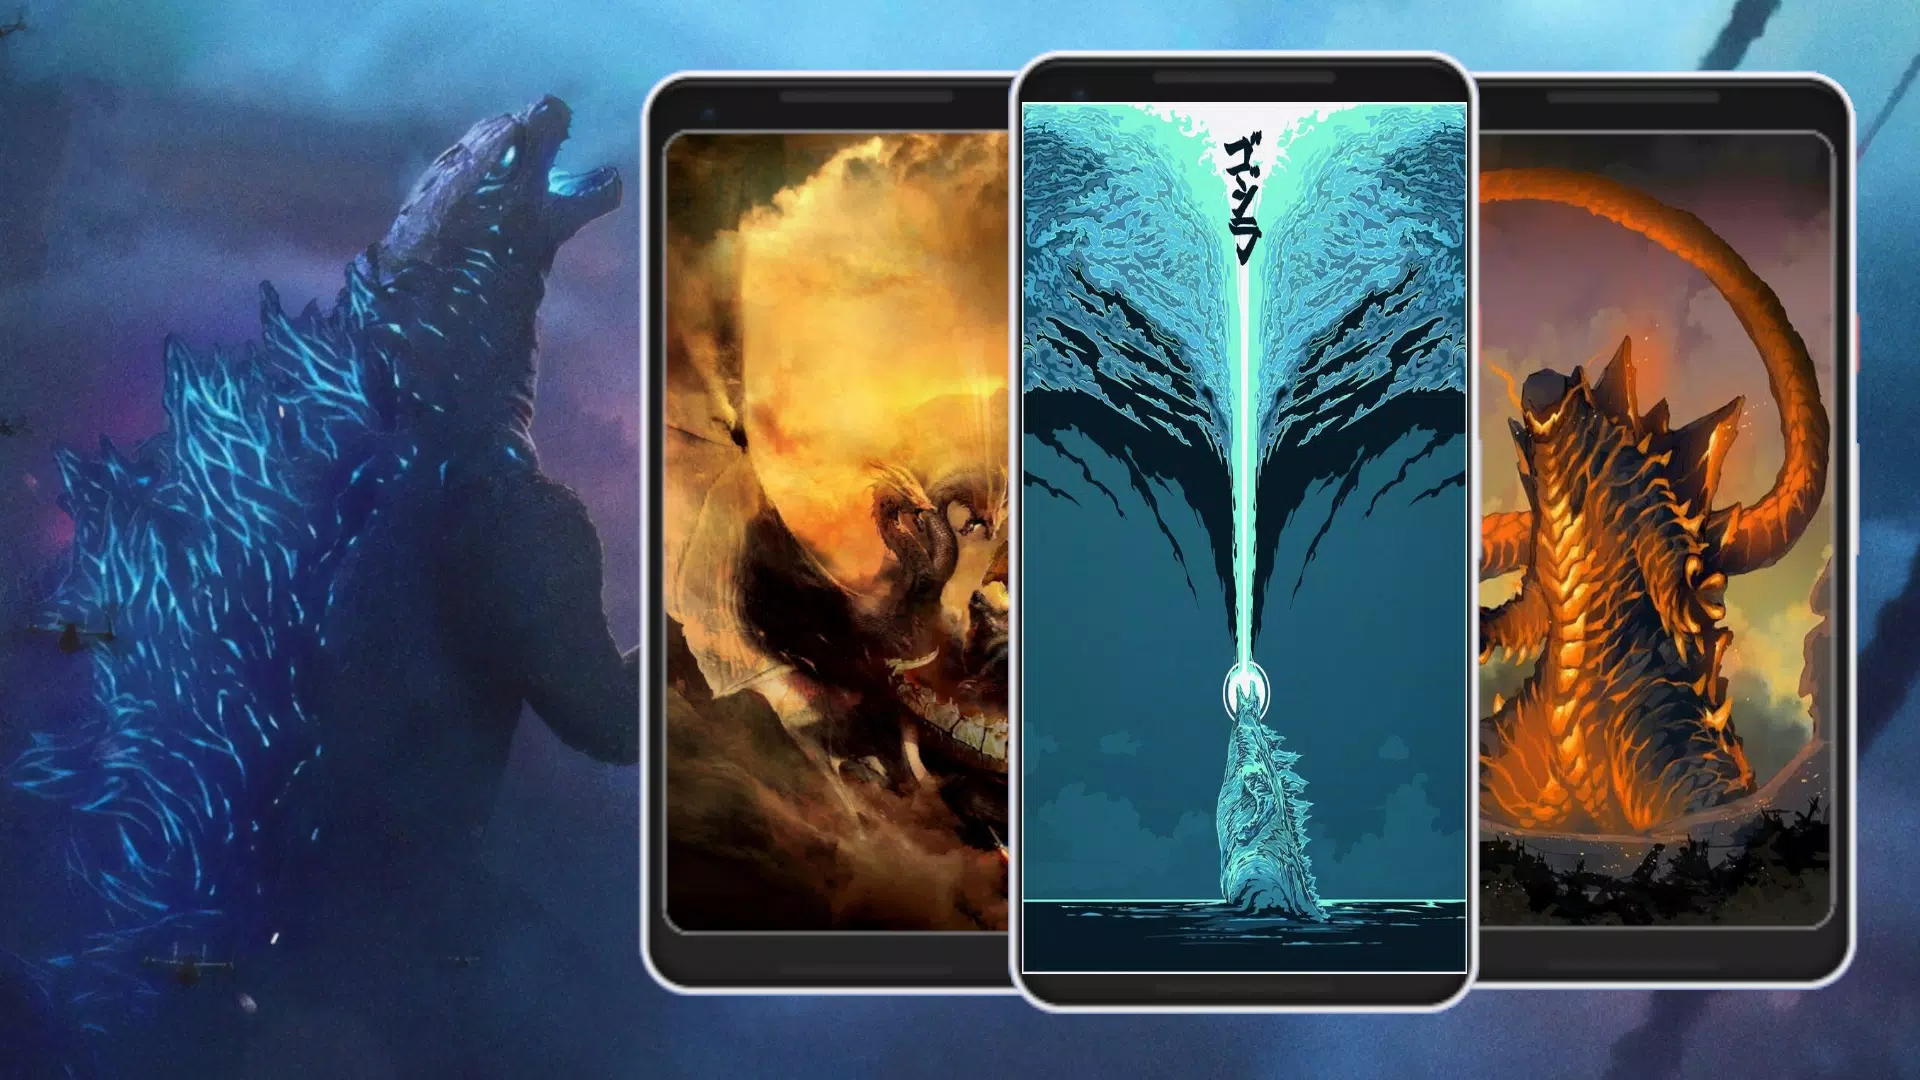 Kaiju wallpaper hd apk for android download